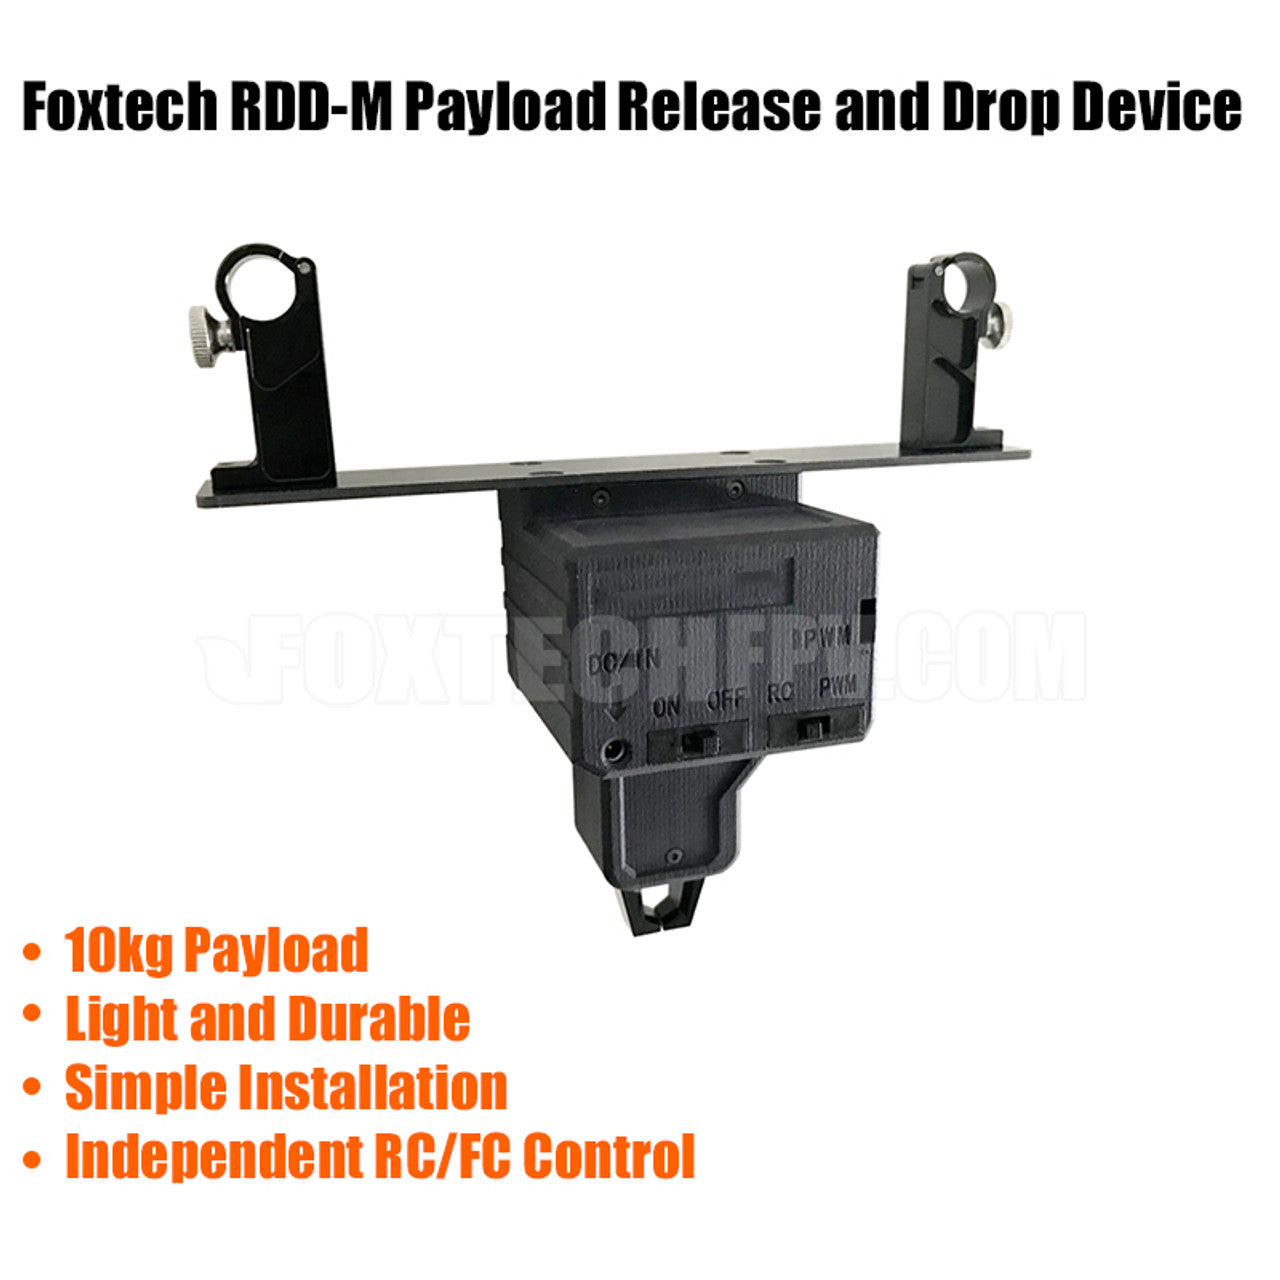 RDD-M 10KG Payload Release and Drop, Payload release and drop device for up to 10kg loads, with lightweight and durable design.